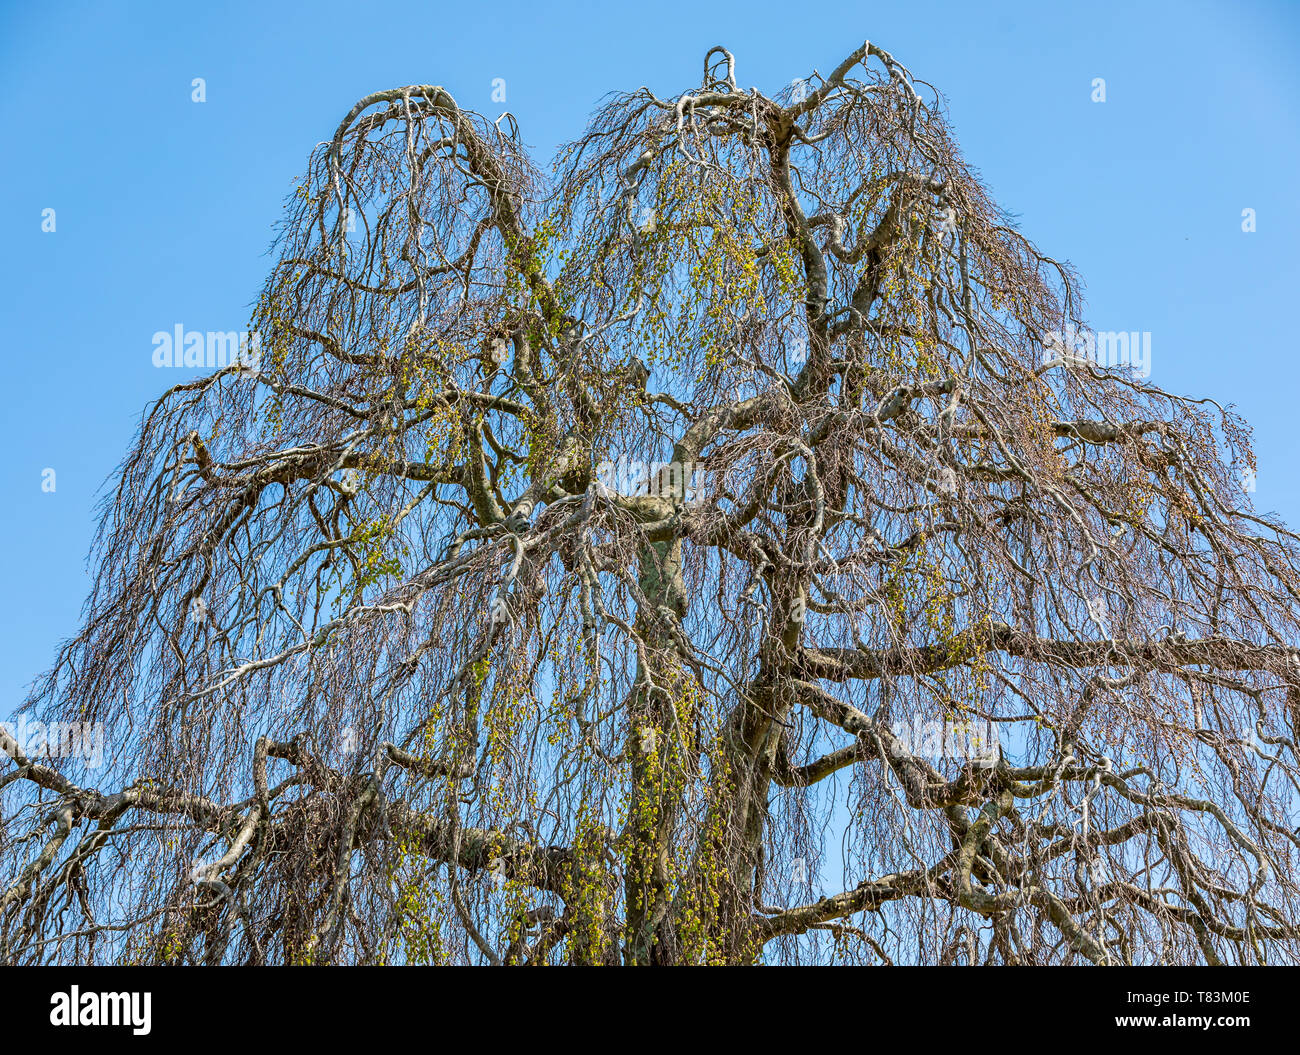 weepeing willow in early spring without many leaves Stock Photo